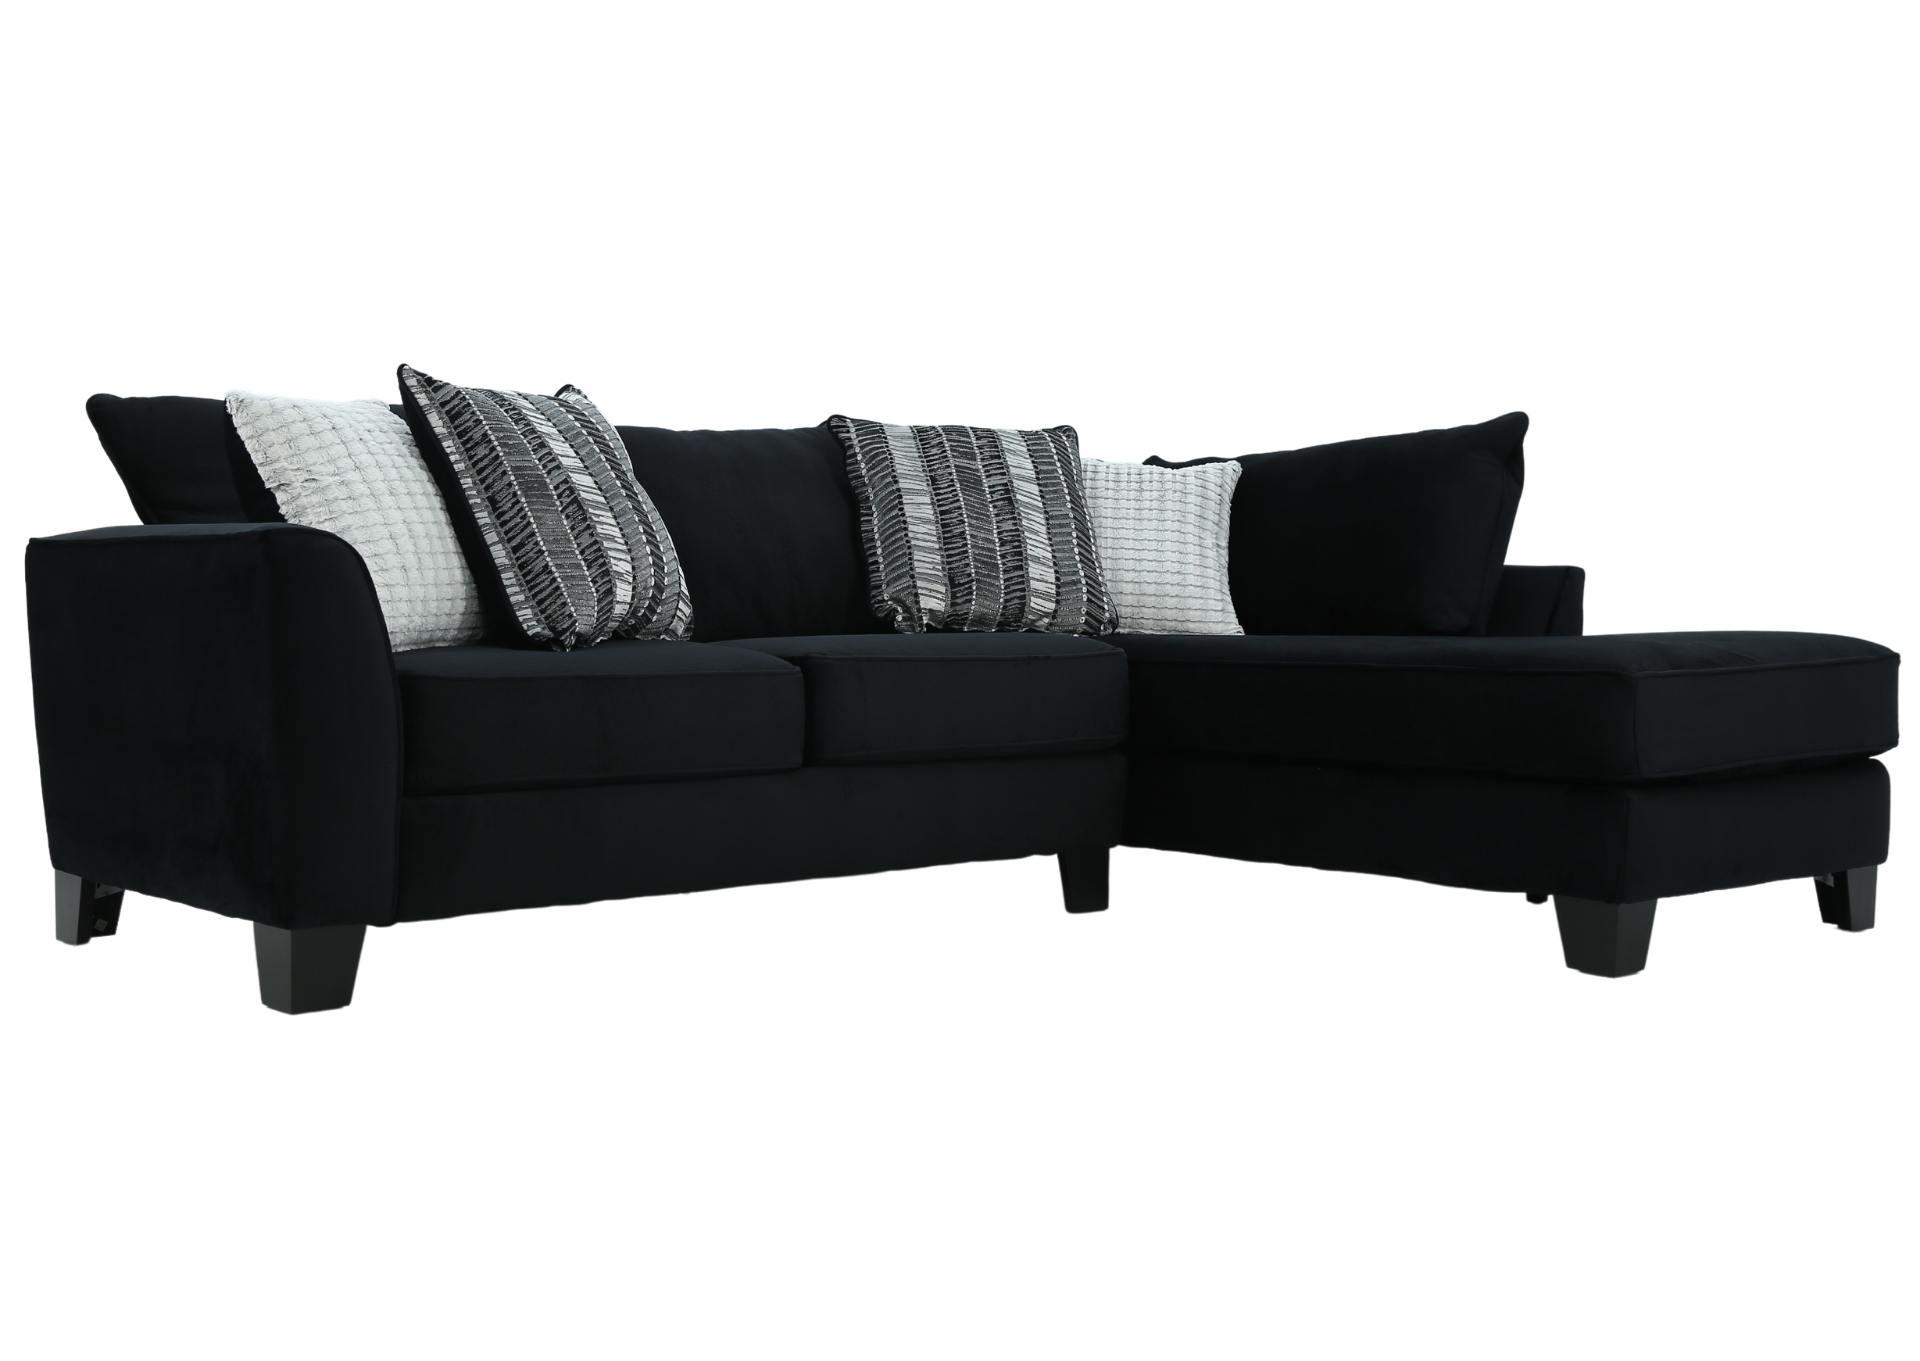 GROOVY BLACK 2 PIECE SECTIONAL